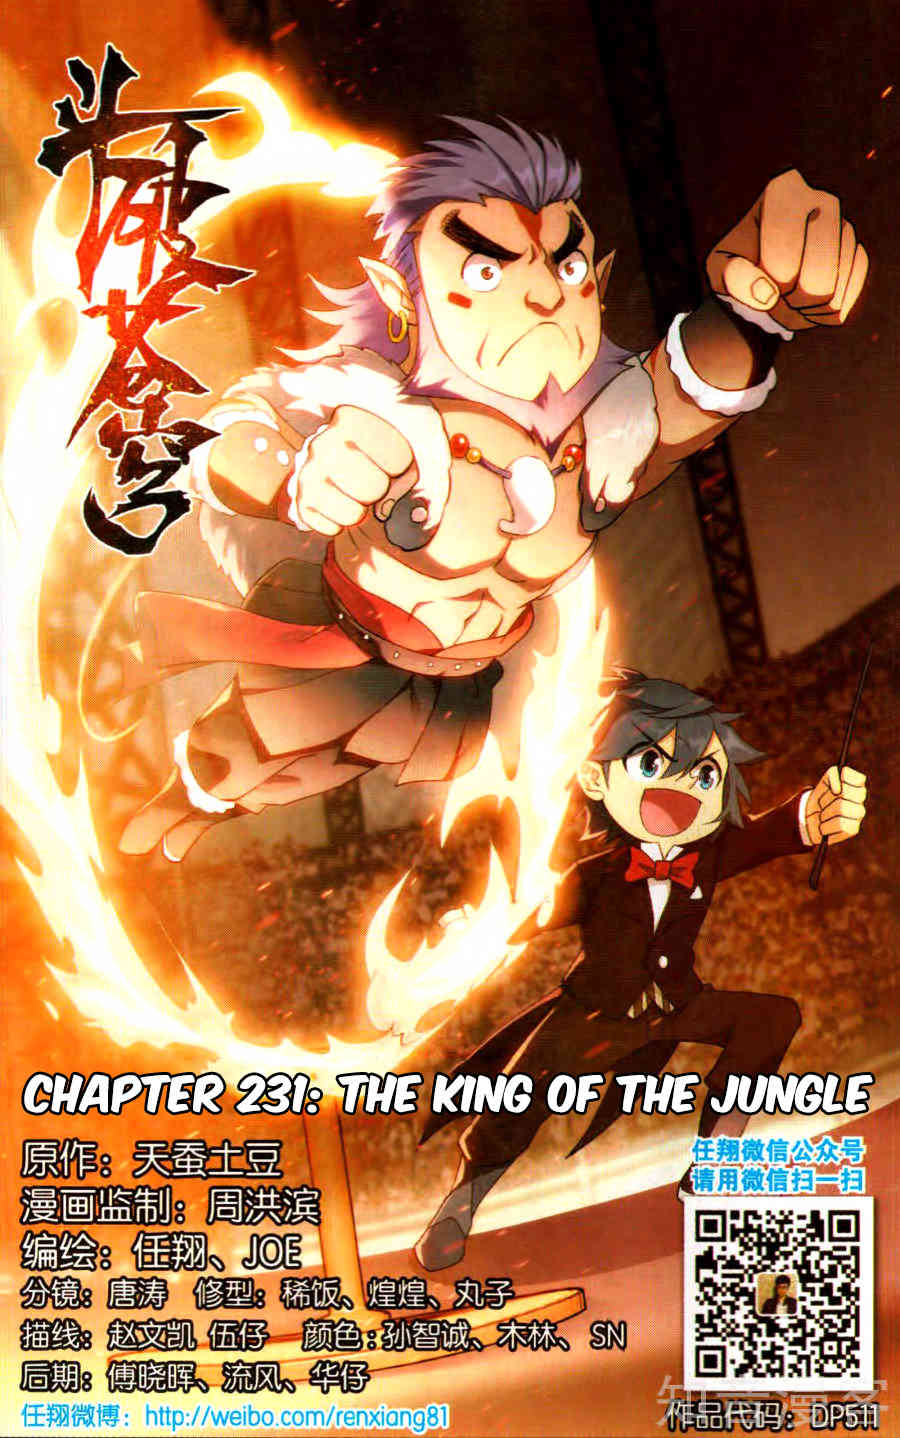 Fights Breaking Through The Heavens ch.231